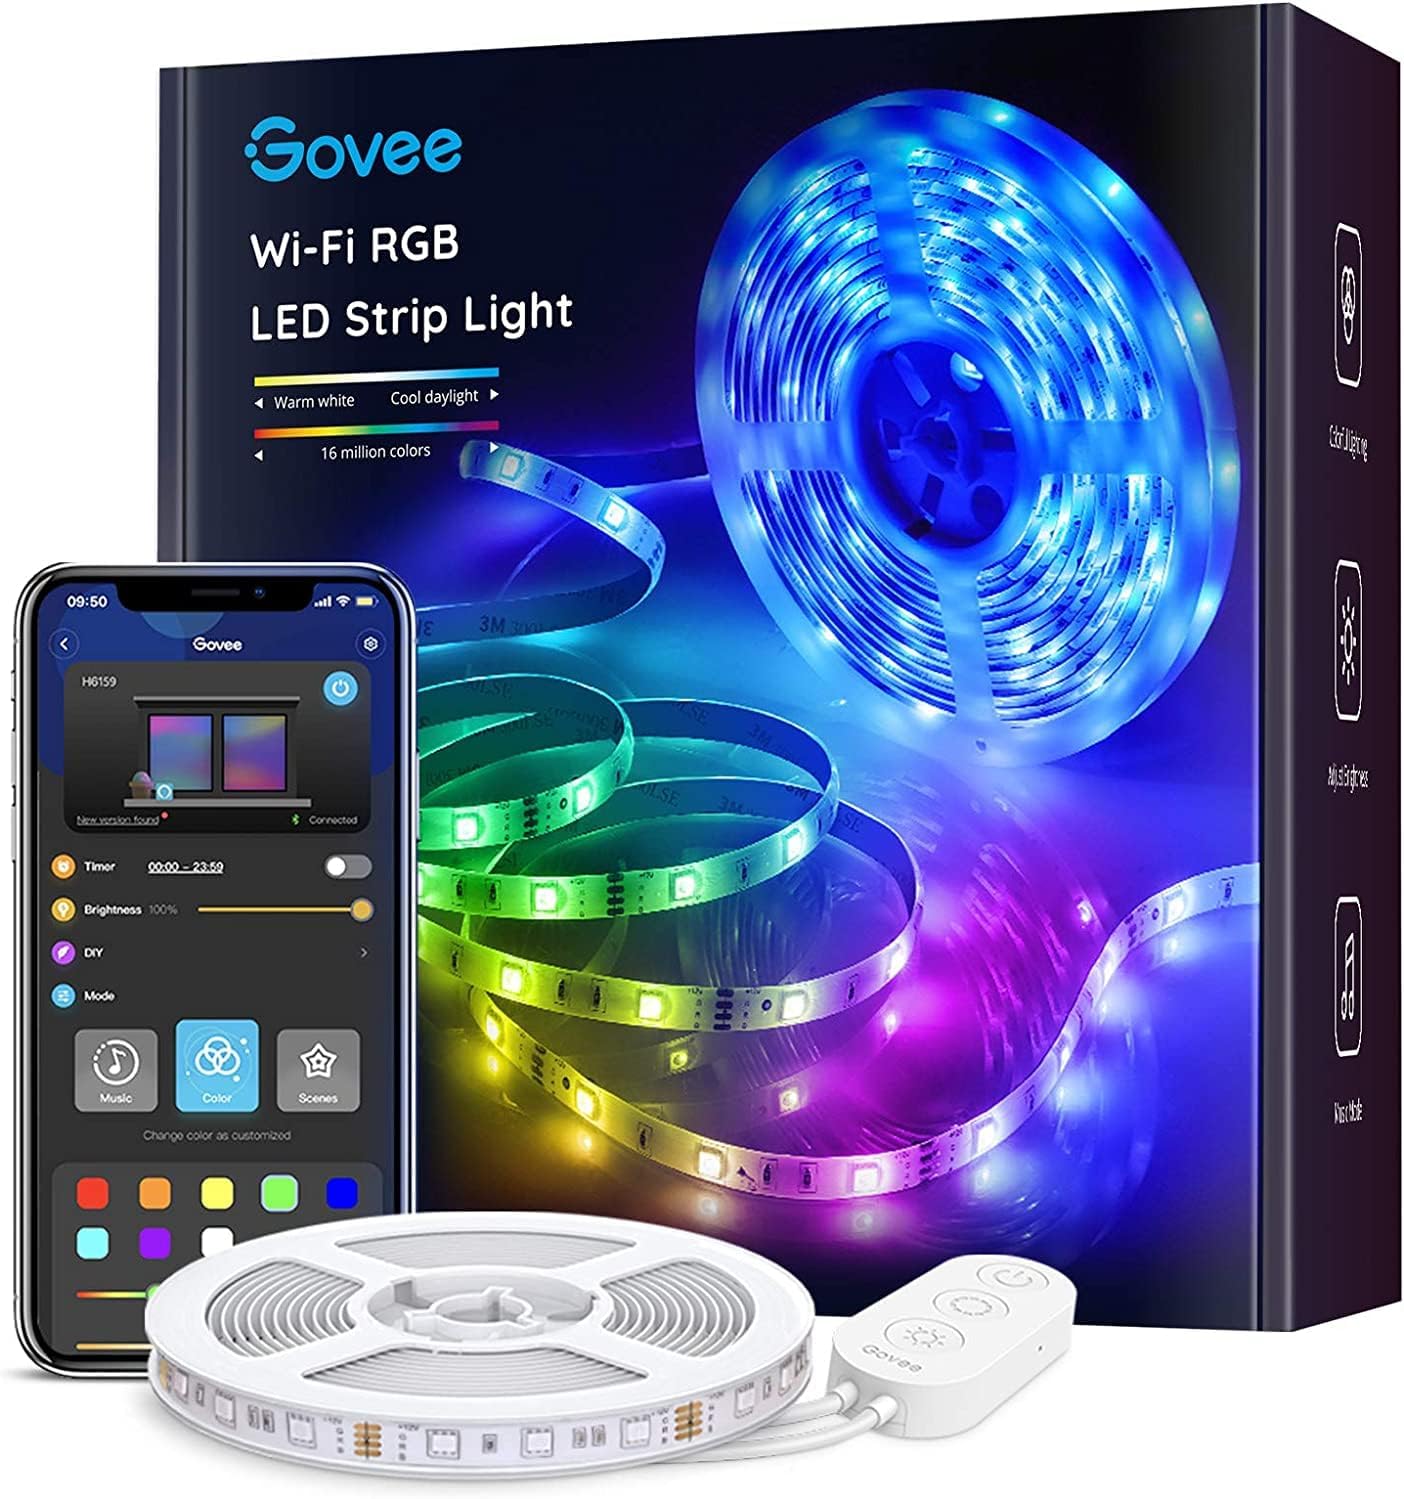 Images of a box of Govee smart strip lights next to a phone with the controls